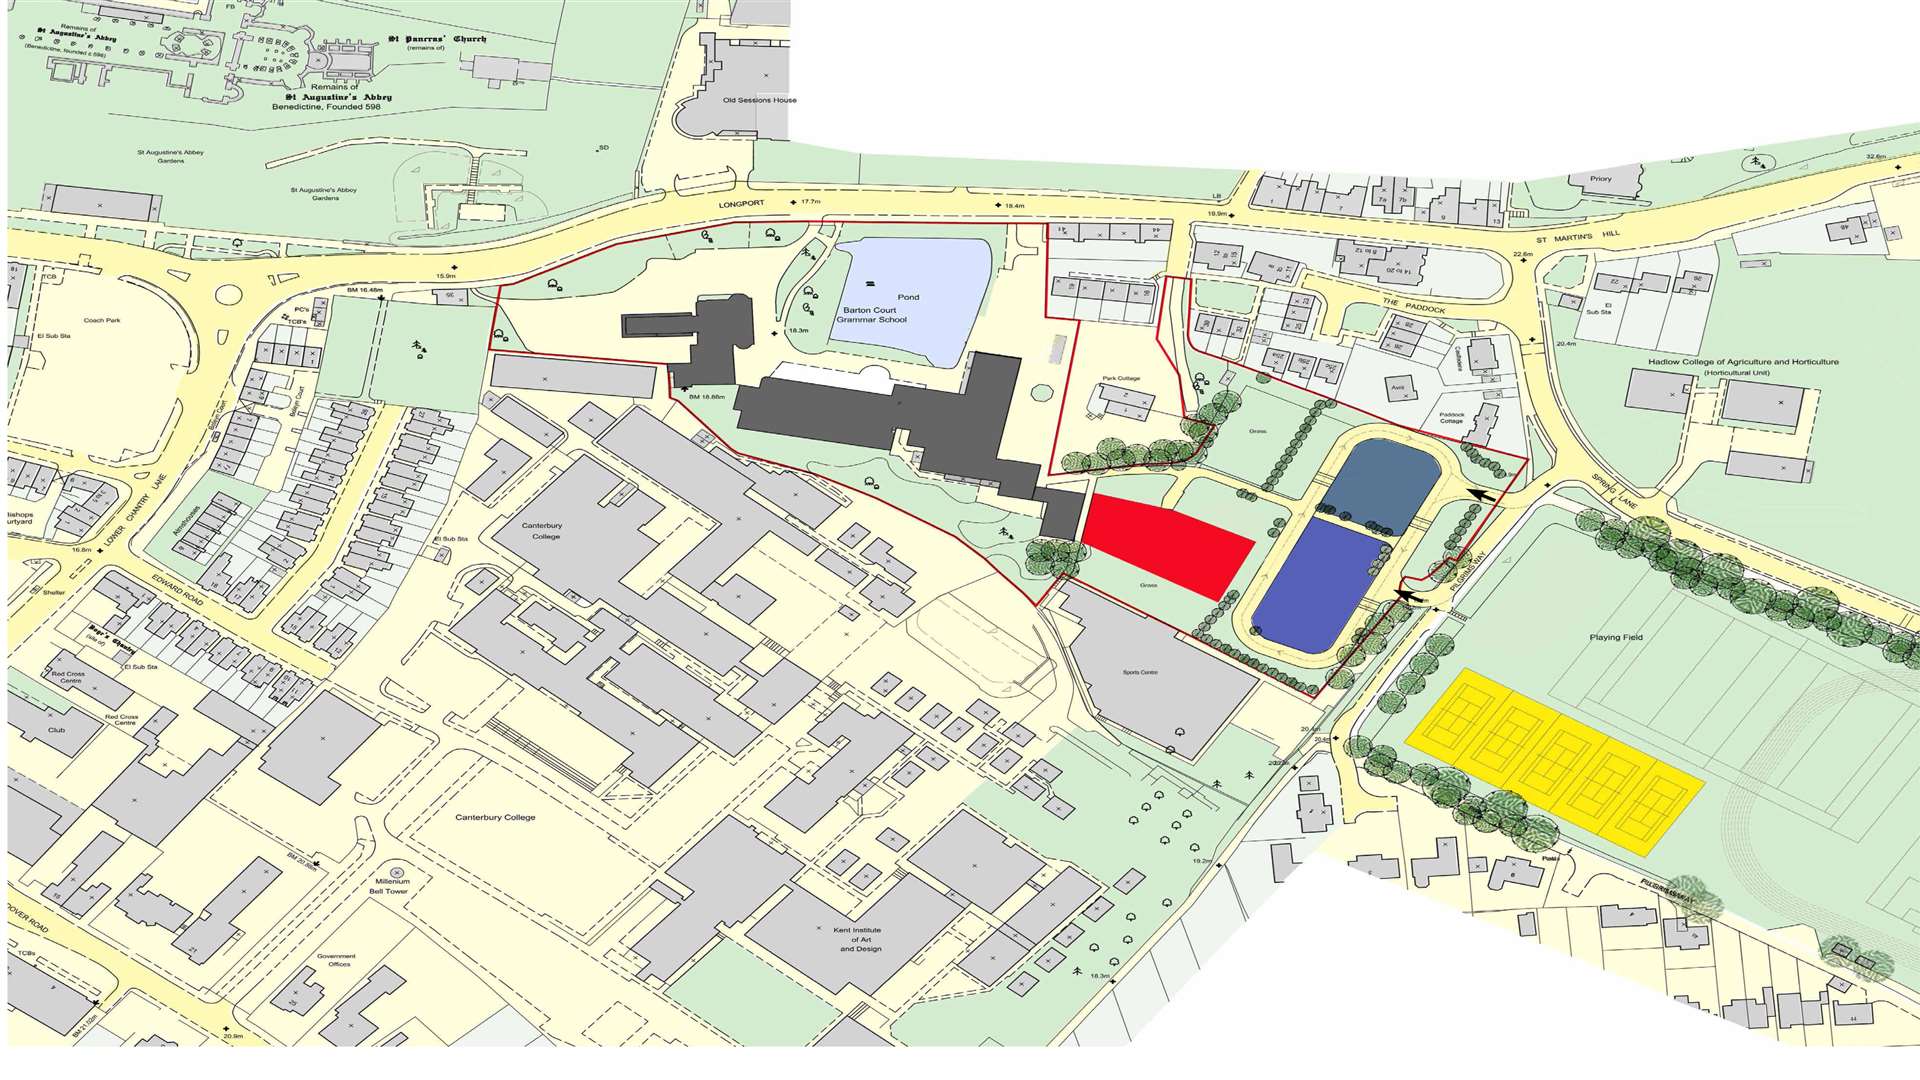 A plan shows where the new buildings, car park and entrance could go